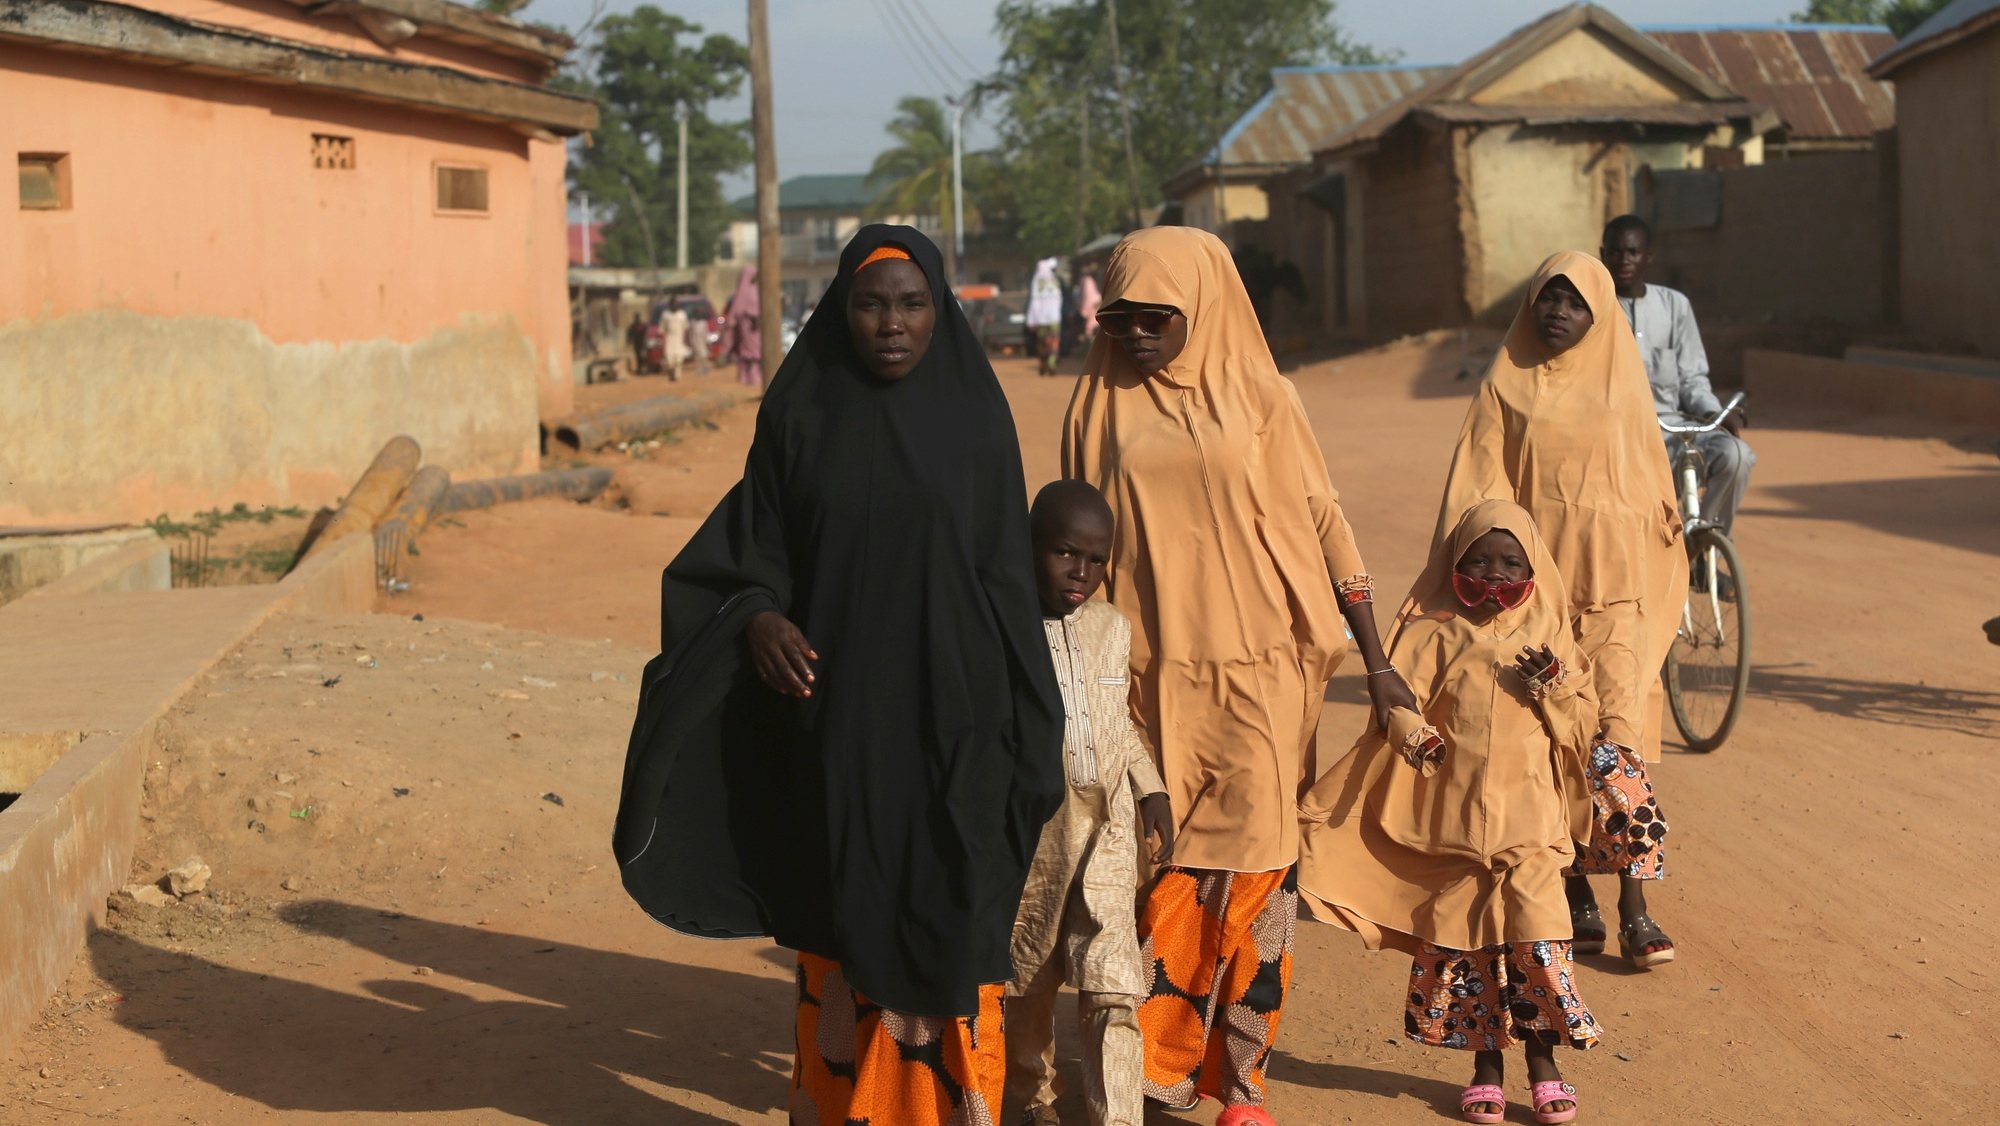 epa09200616 A Muslim woman walks along a road with her children after attending the Jumat prayer at the Zaria central mosque in northern Nigeria 14 May 2021. Muslims around the world are celebrating Eid al-Fitr, the three day festival marking the end of the Muslim holy fasting month of Ramadan. Eid al-Fitr is one of the two major holidays in Islam.  EPA/AKINTUNDE AKINLEYE